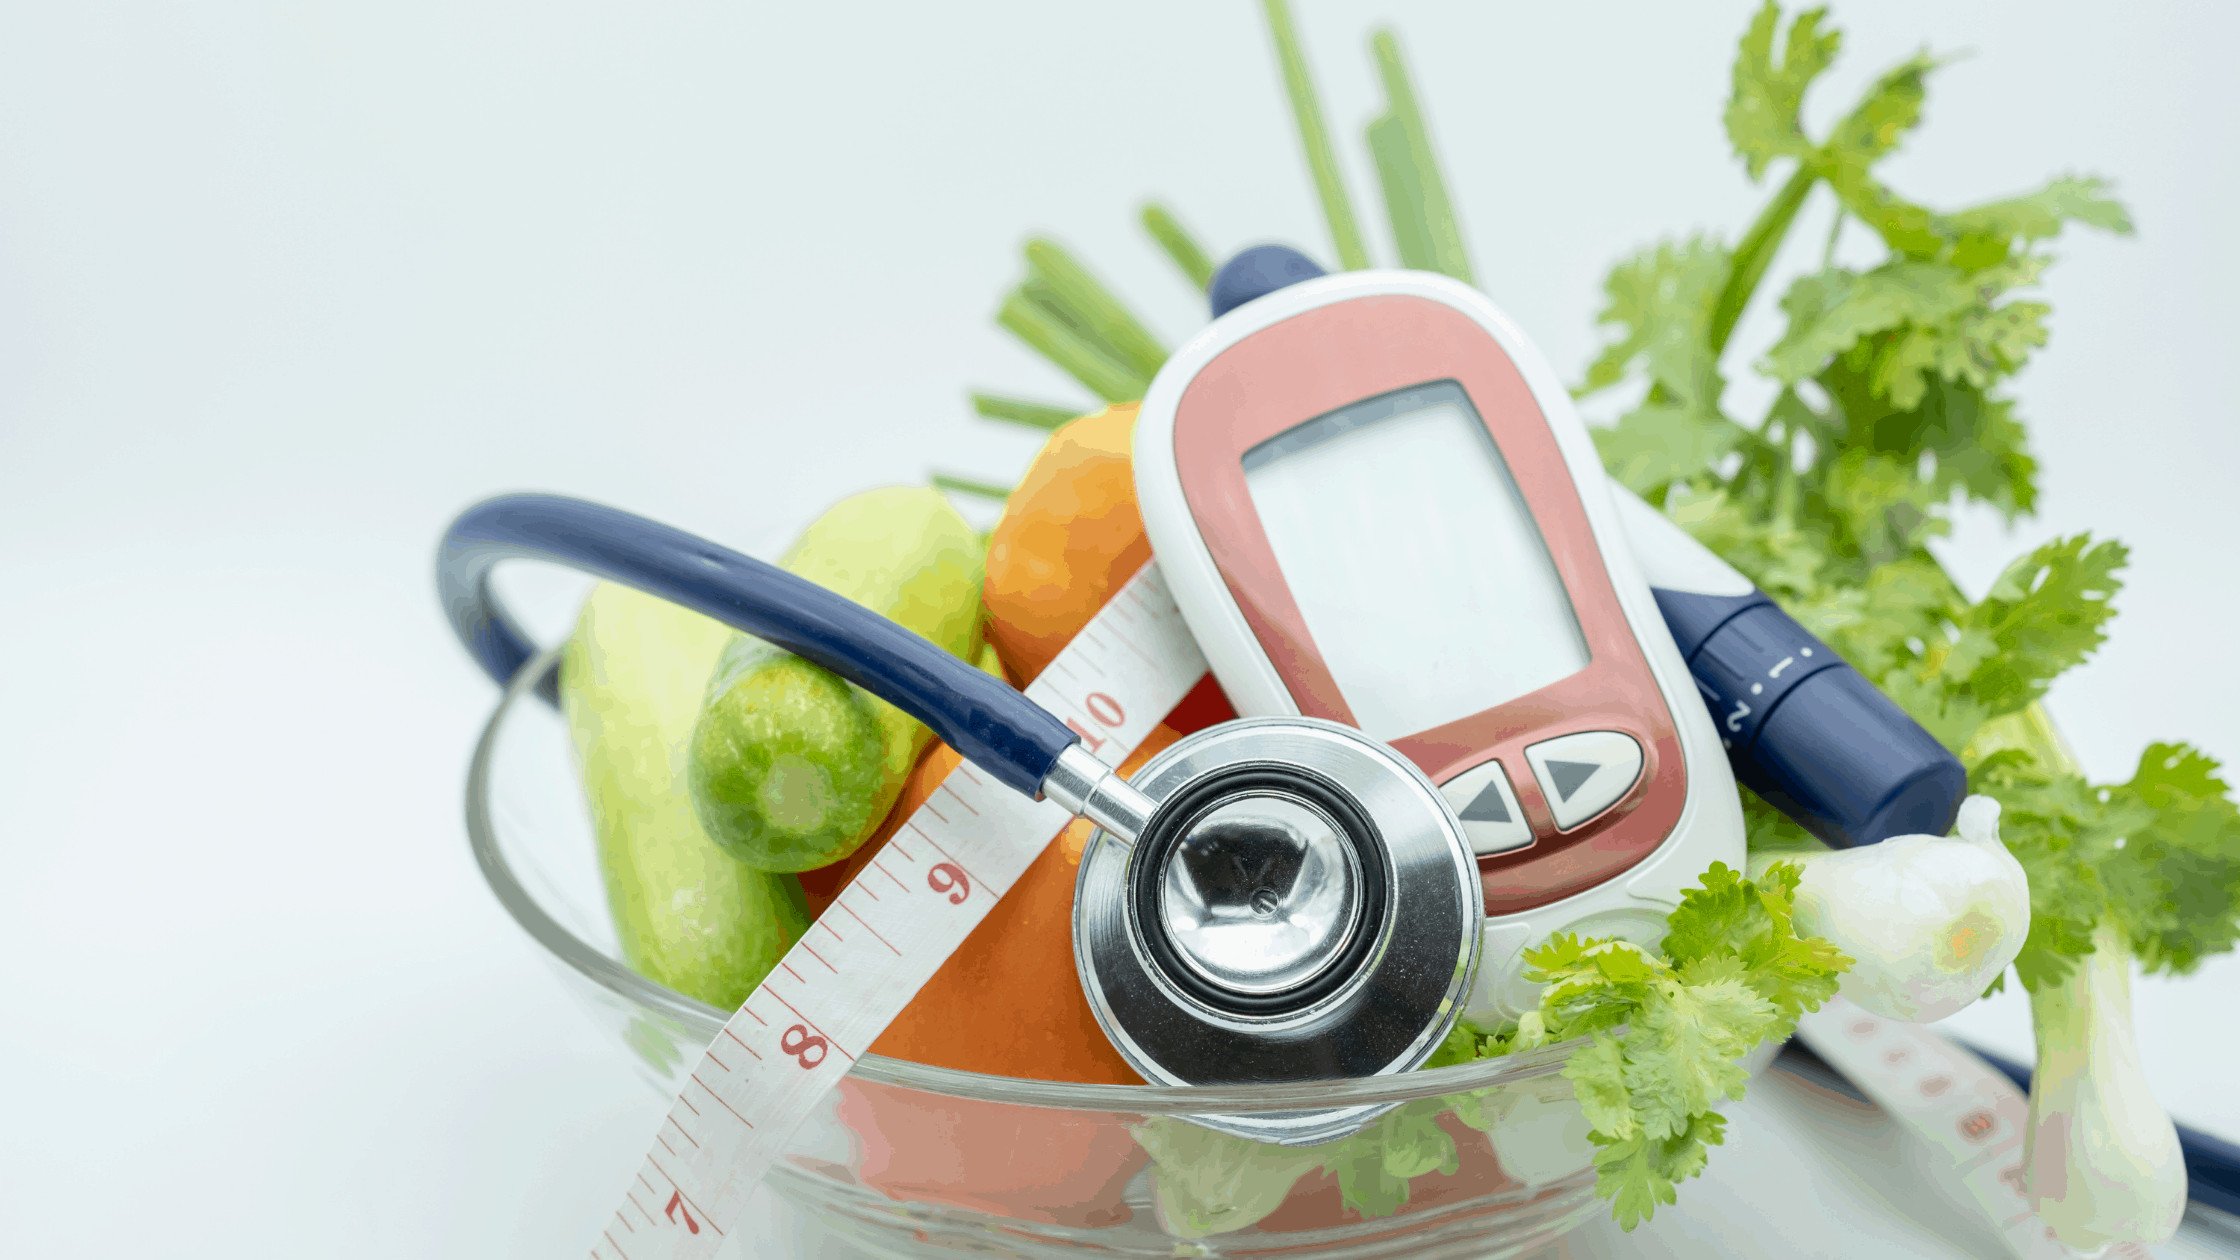 11bowl of veggies with glucometer, stethoscope, and tape measure - manage diabetes